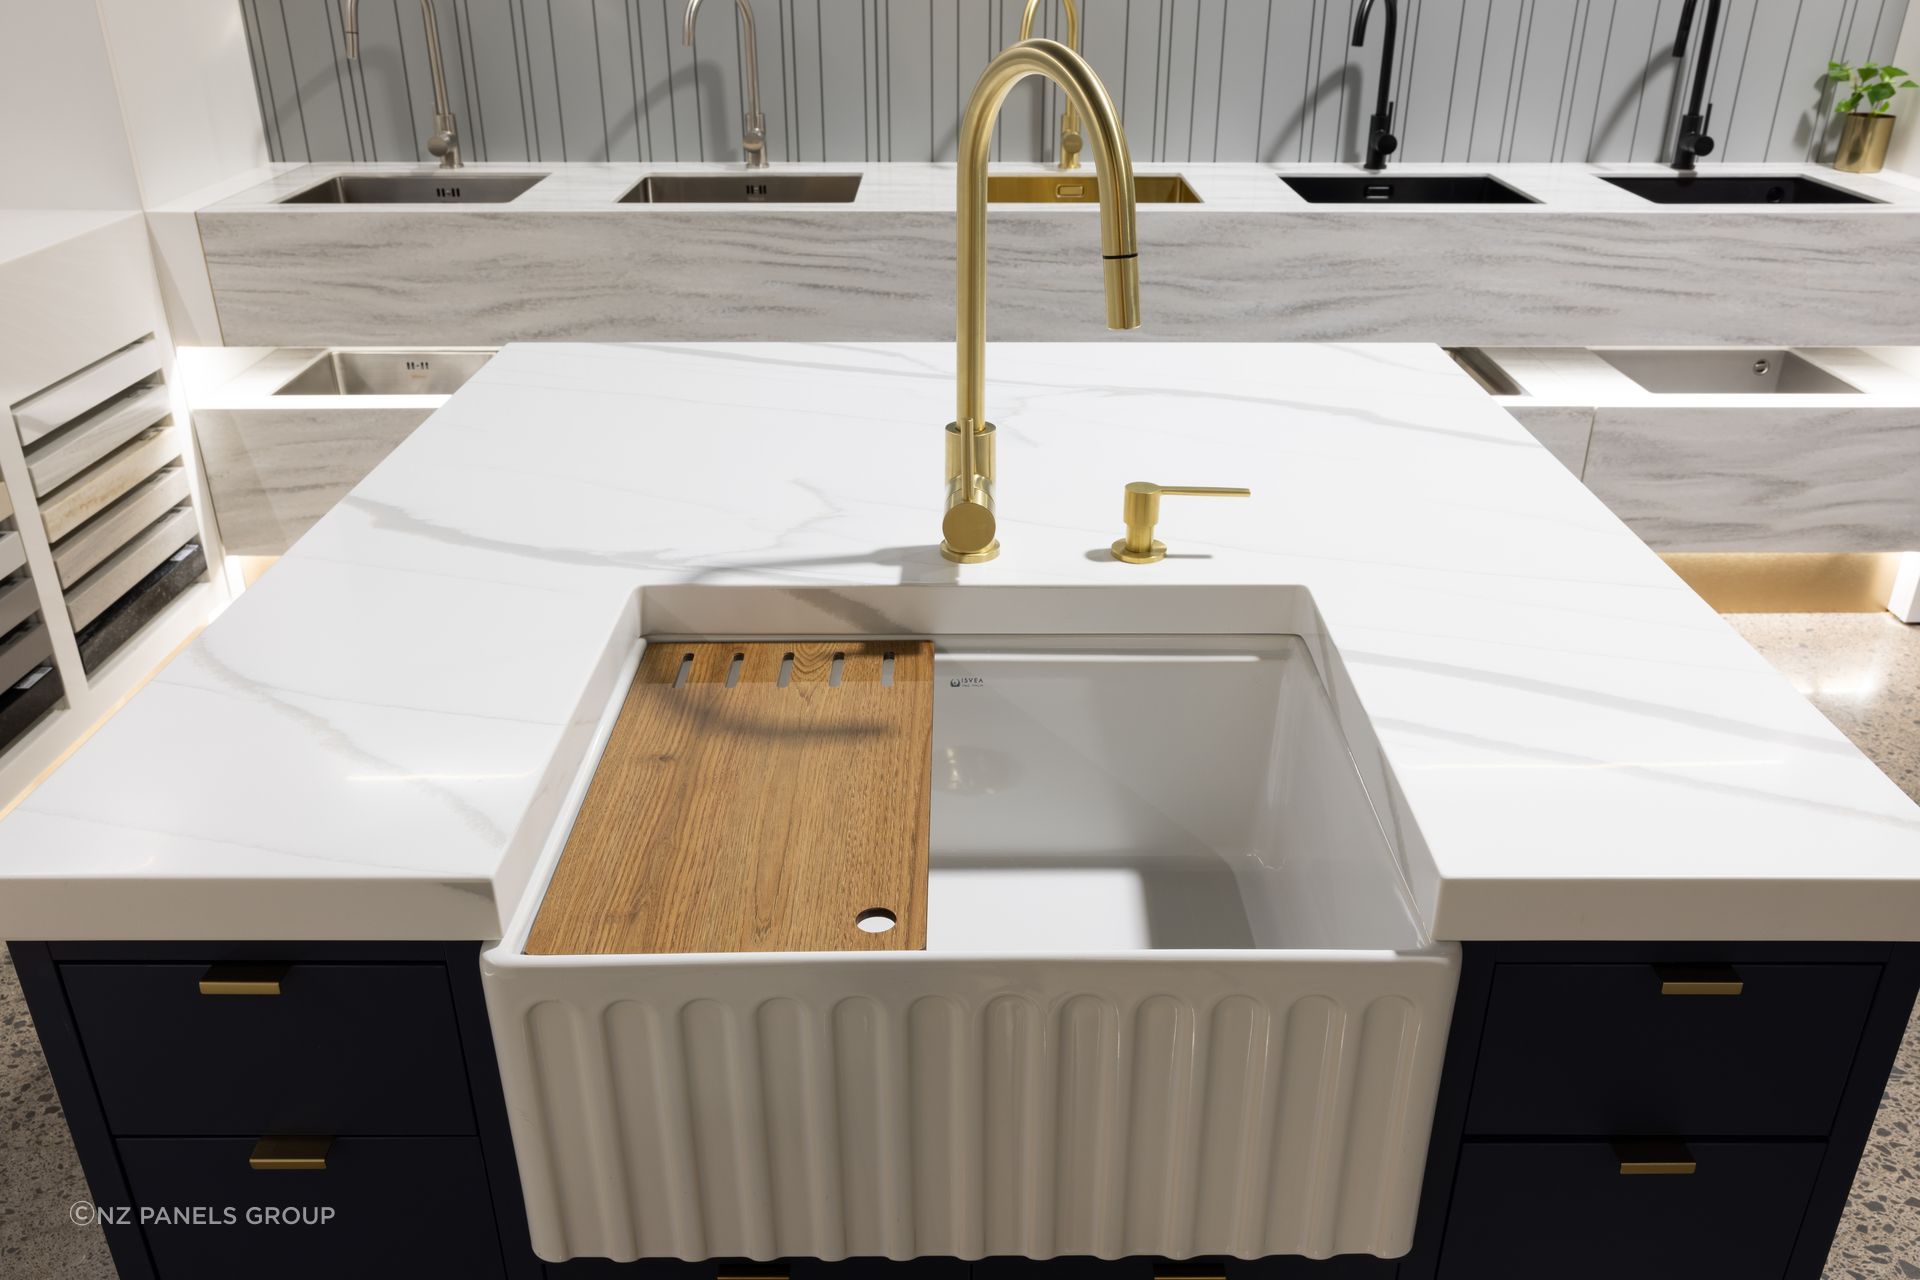 The Ravenna Fireclay Butler Sink by Italian brand Isvea is the newest addition to the Mercer range.